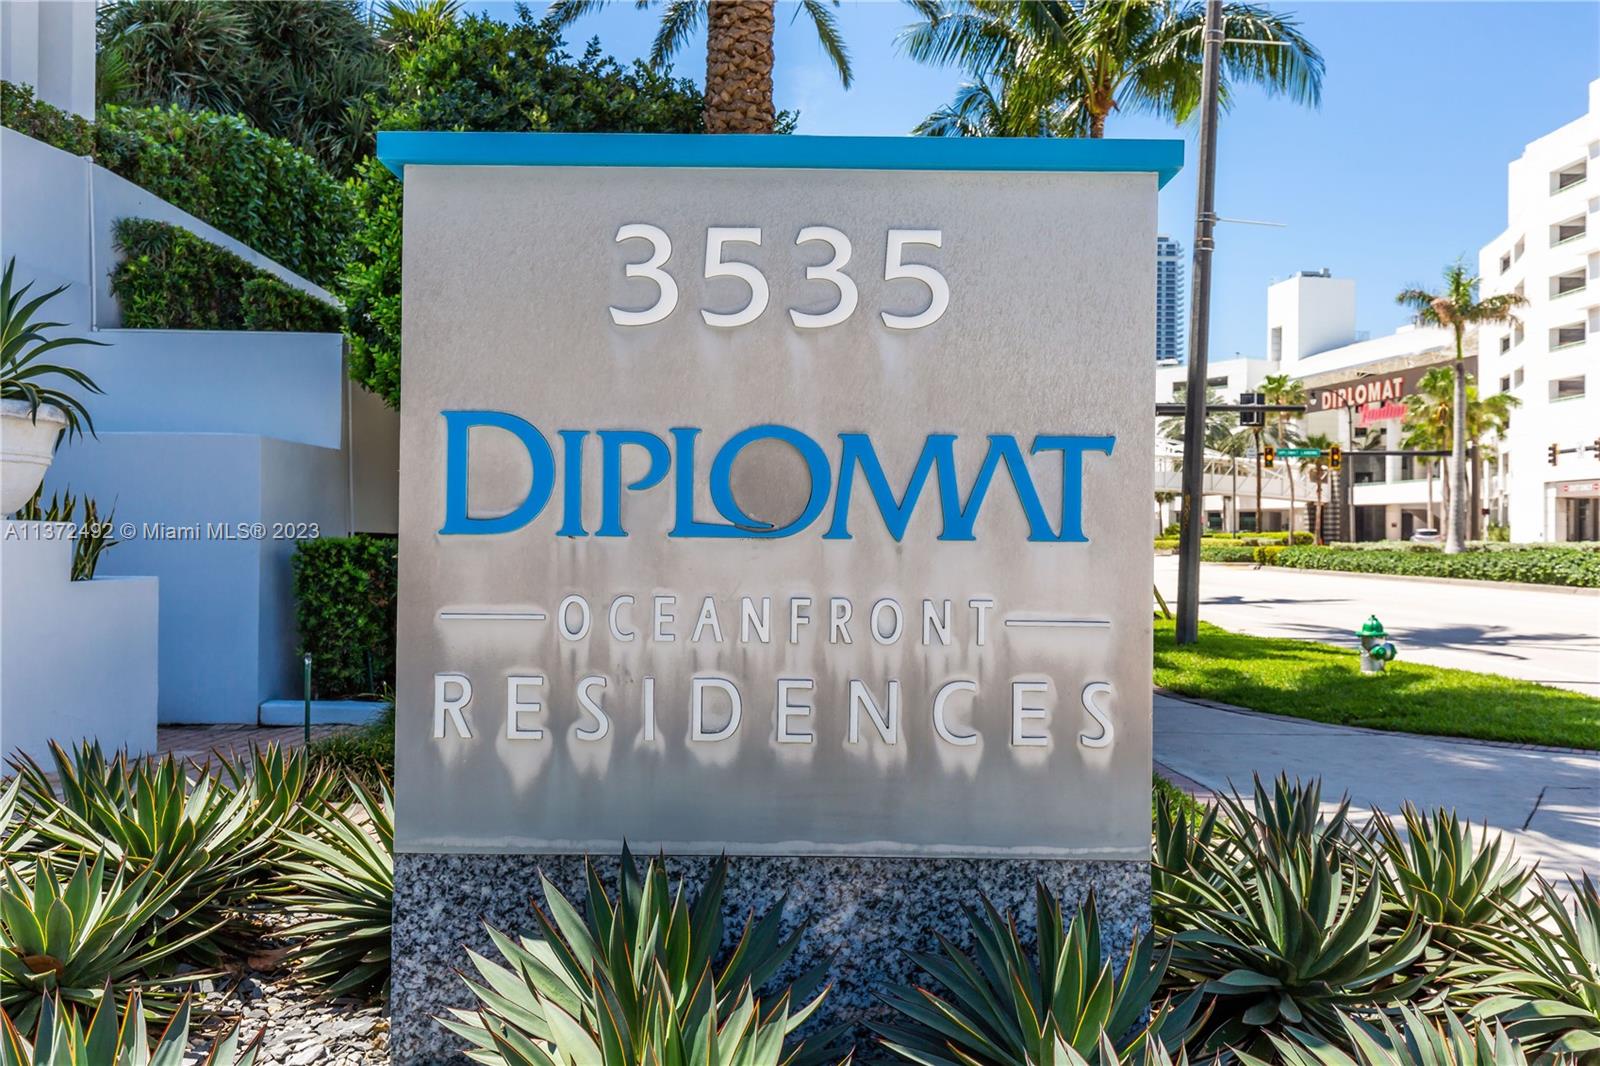 Photo 1 of Diplomat Oceanfront Resid Apt 805 in Hollywood - MLS A11372492